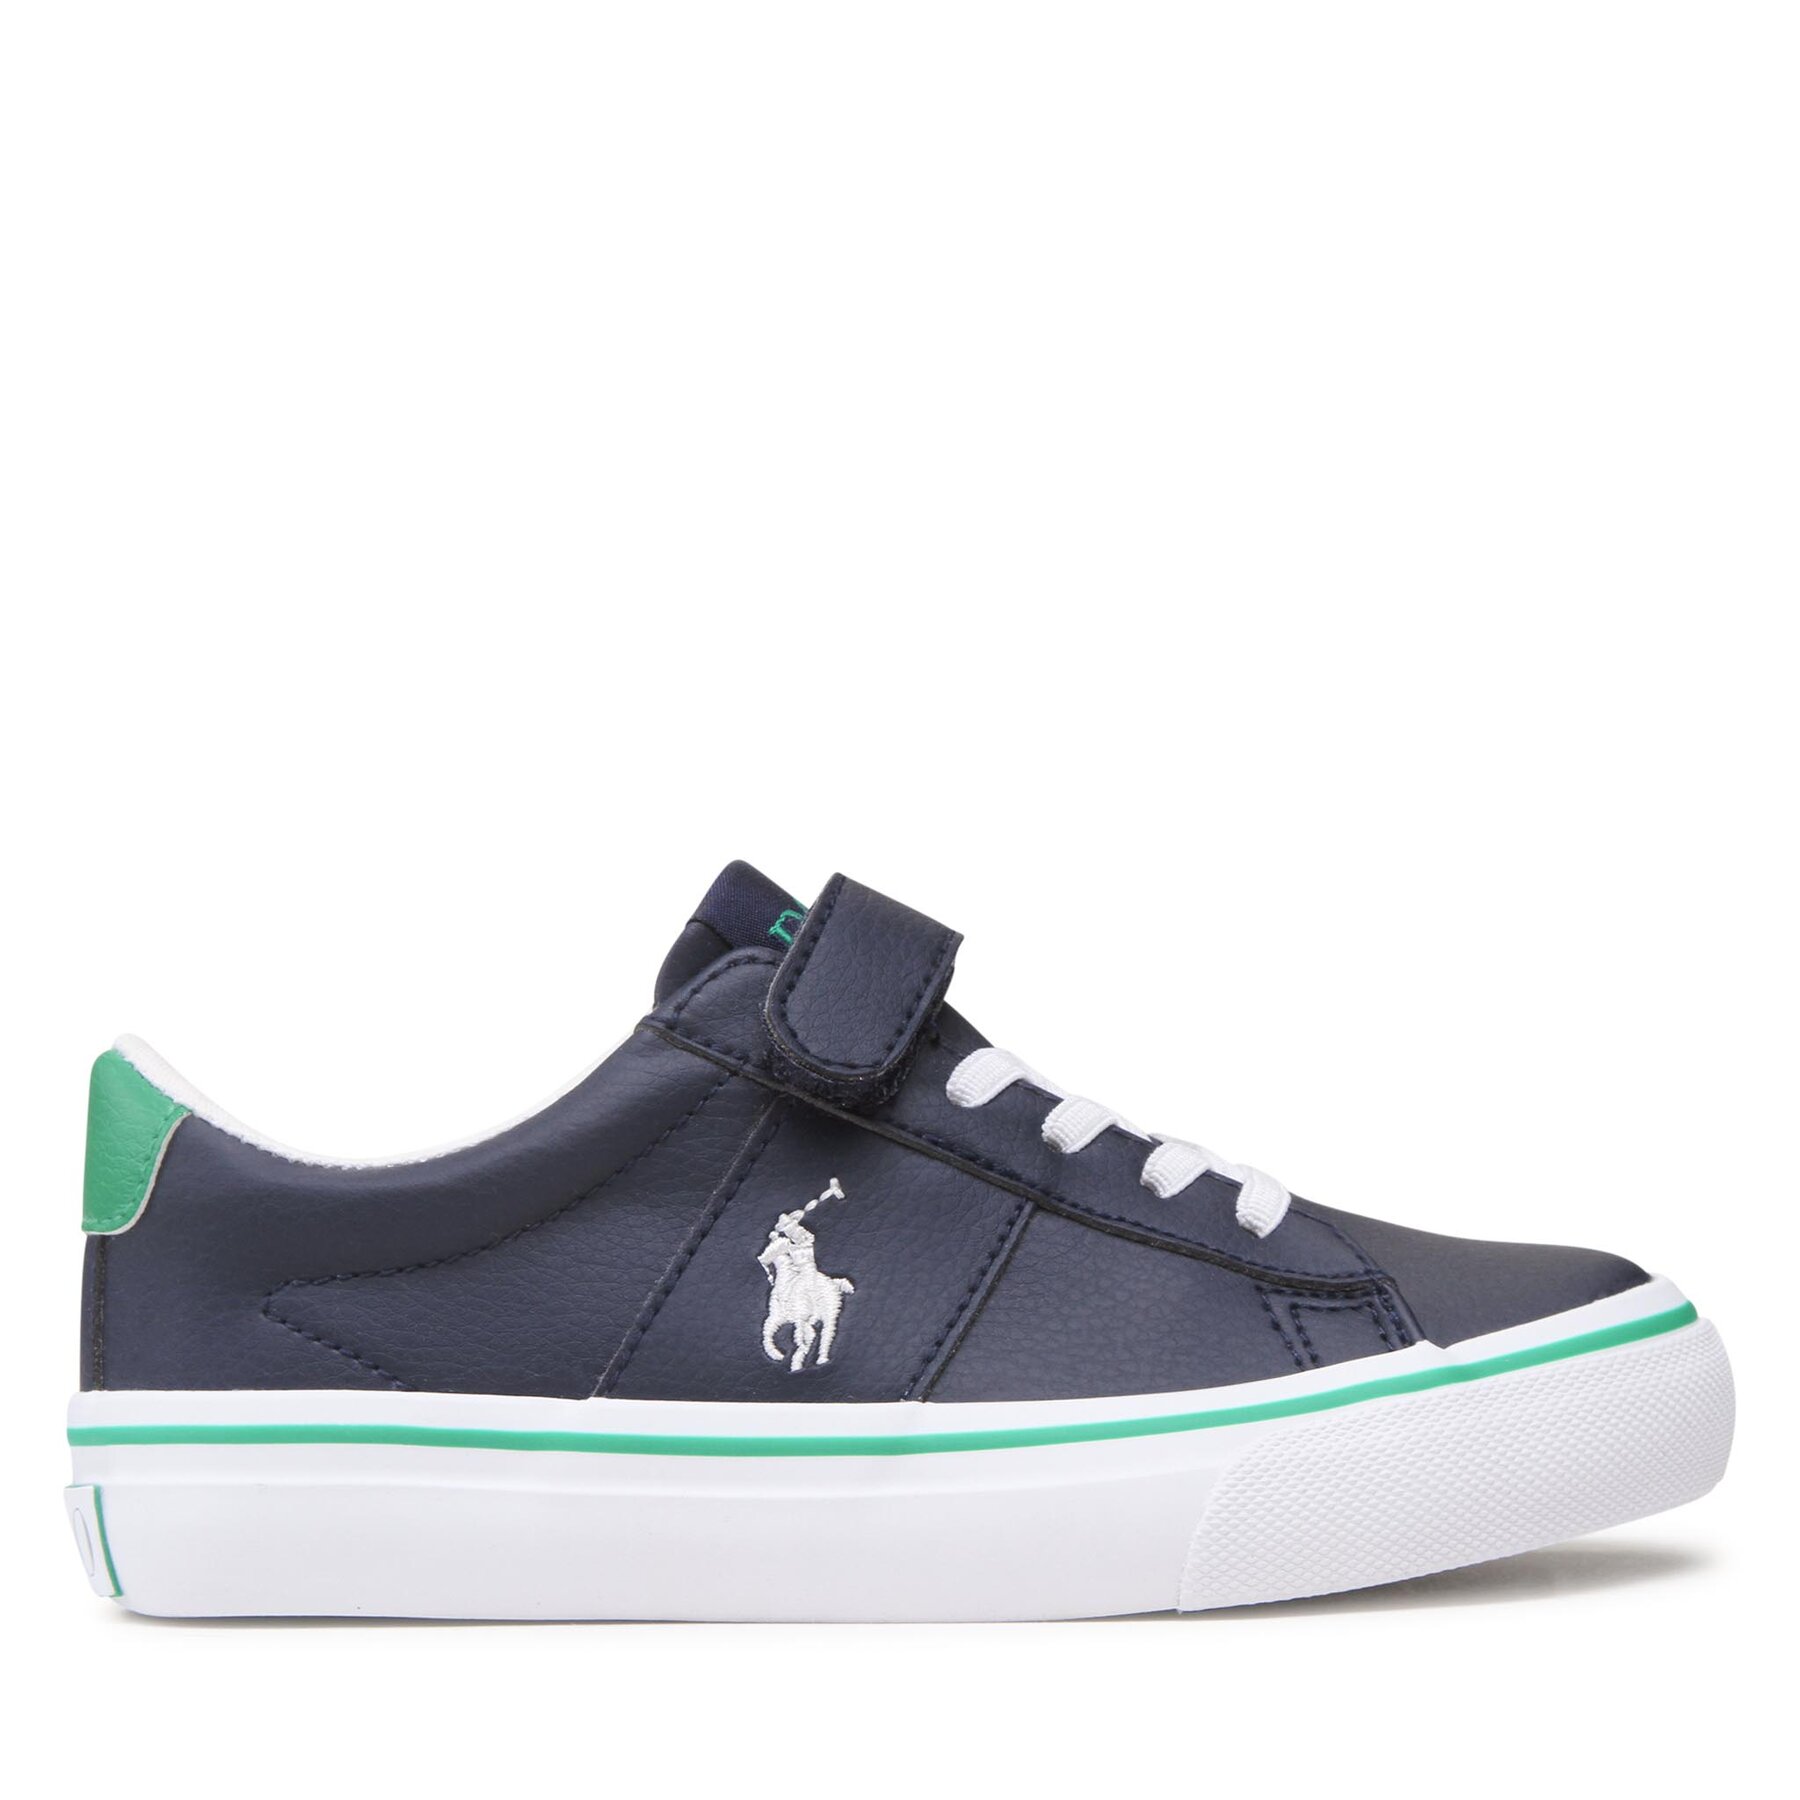 Tenis superge Polo Ralph Lauren Sayer Ps RF104049 Navy Tumbled/Green w/ White PP